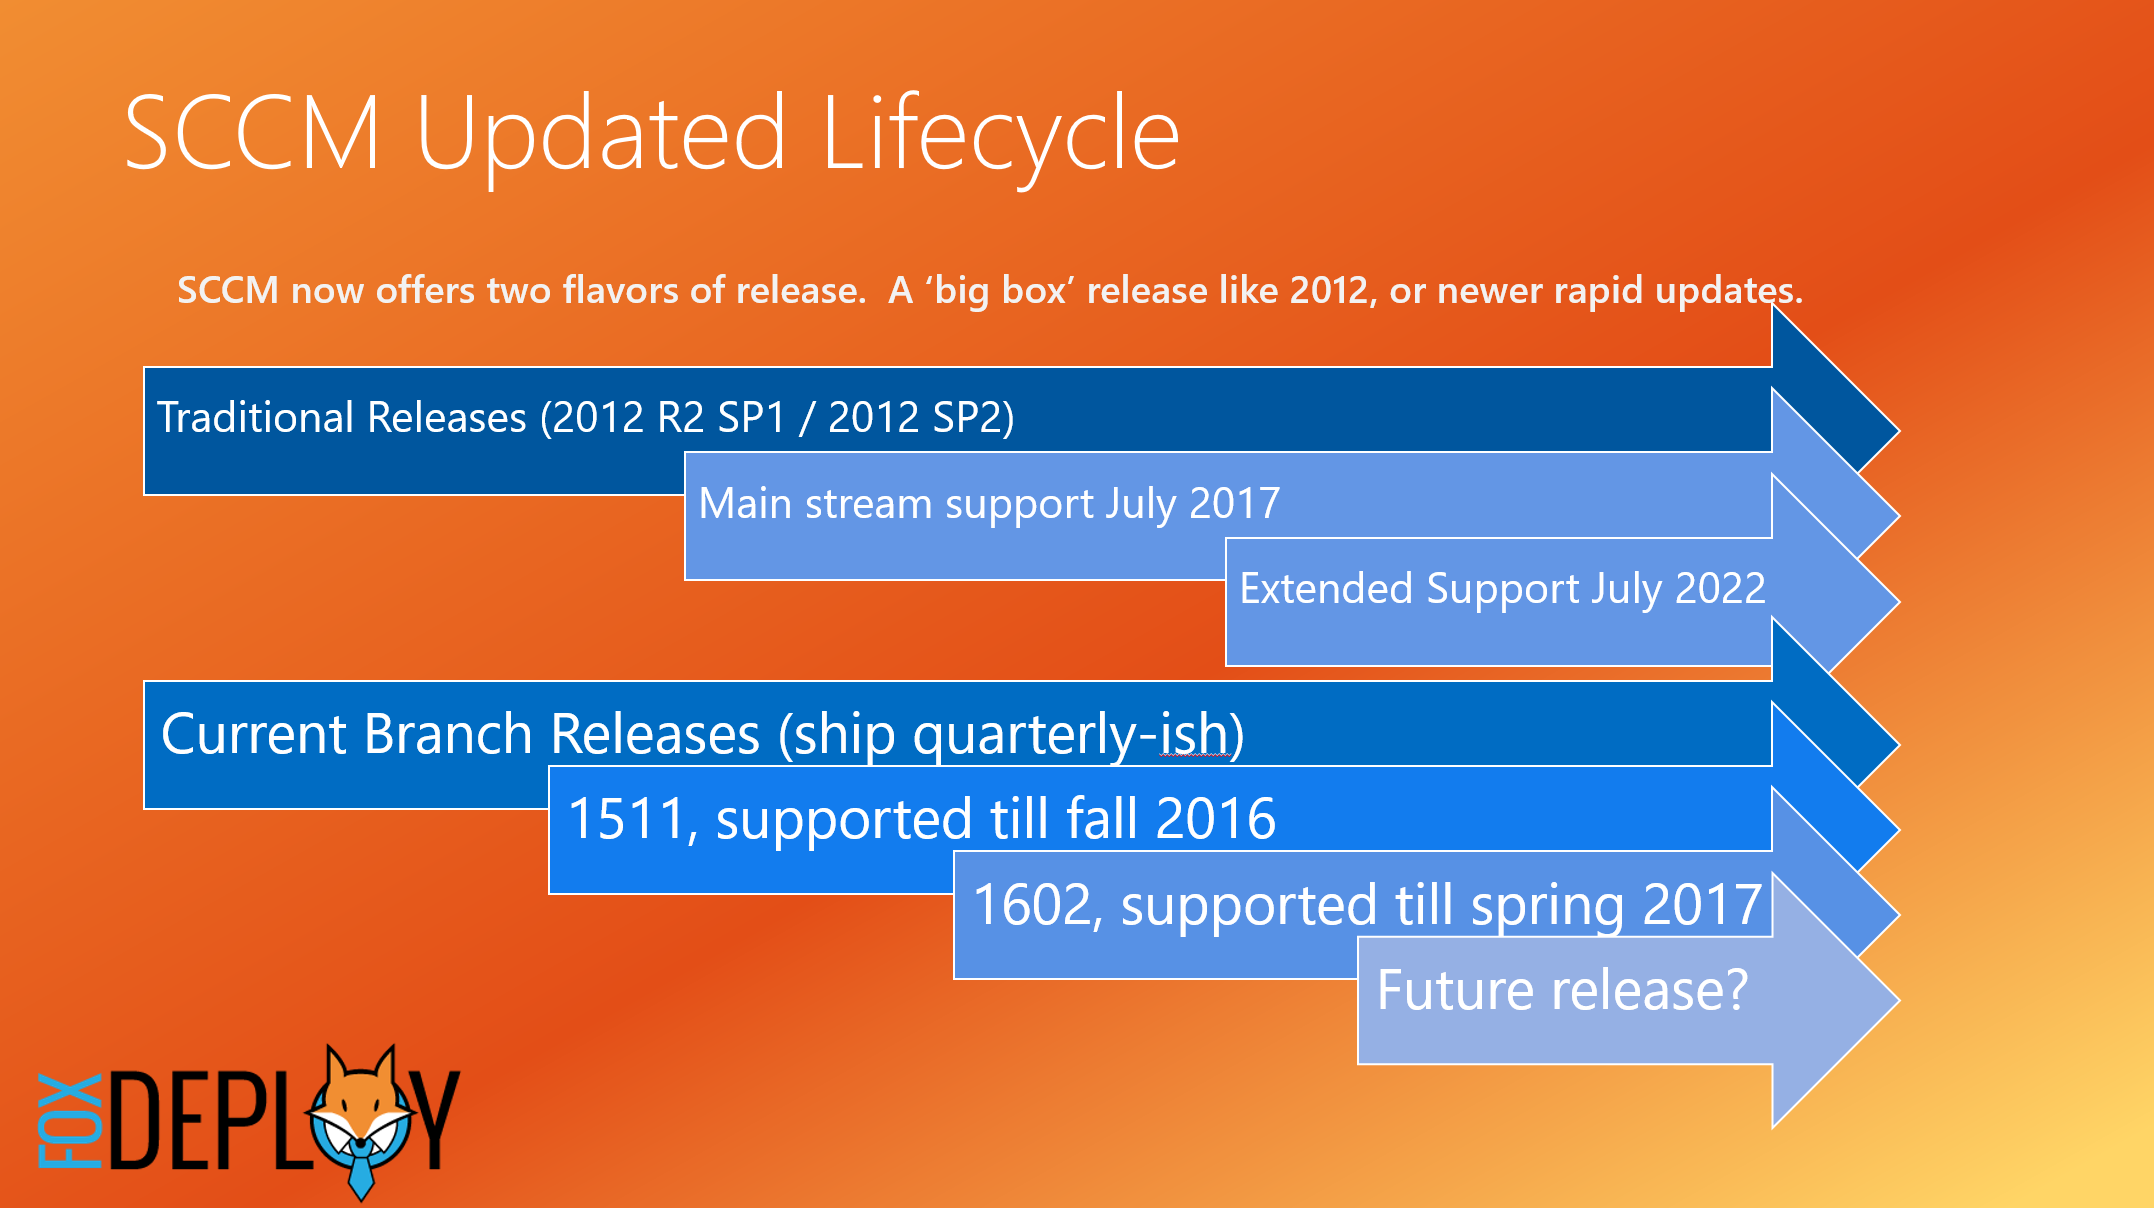 SCCM_Lifecycle_FoxDeploy